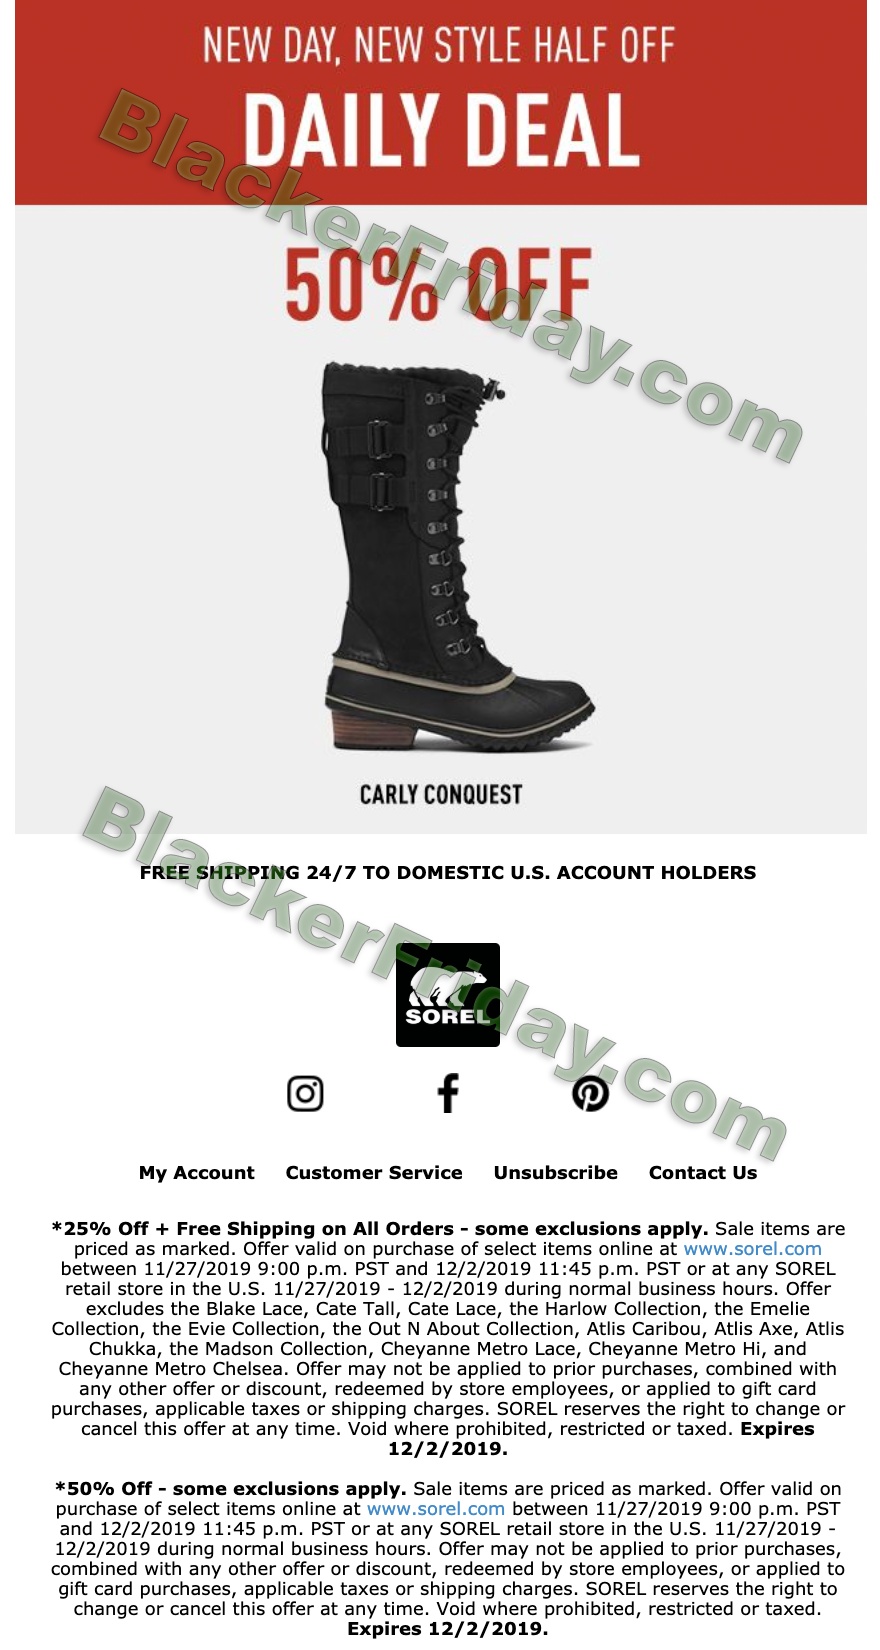 Sorel Black Friday 2021 Sale - What to 